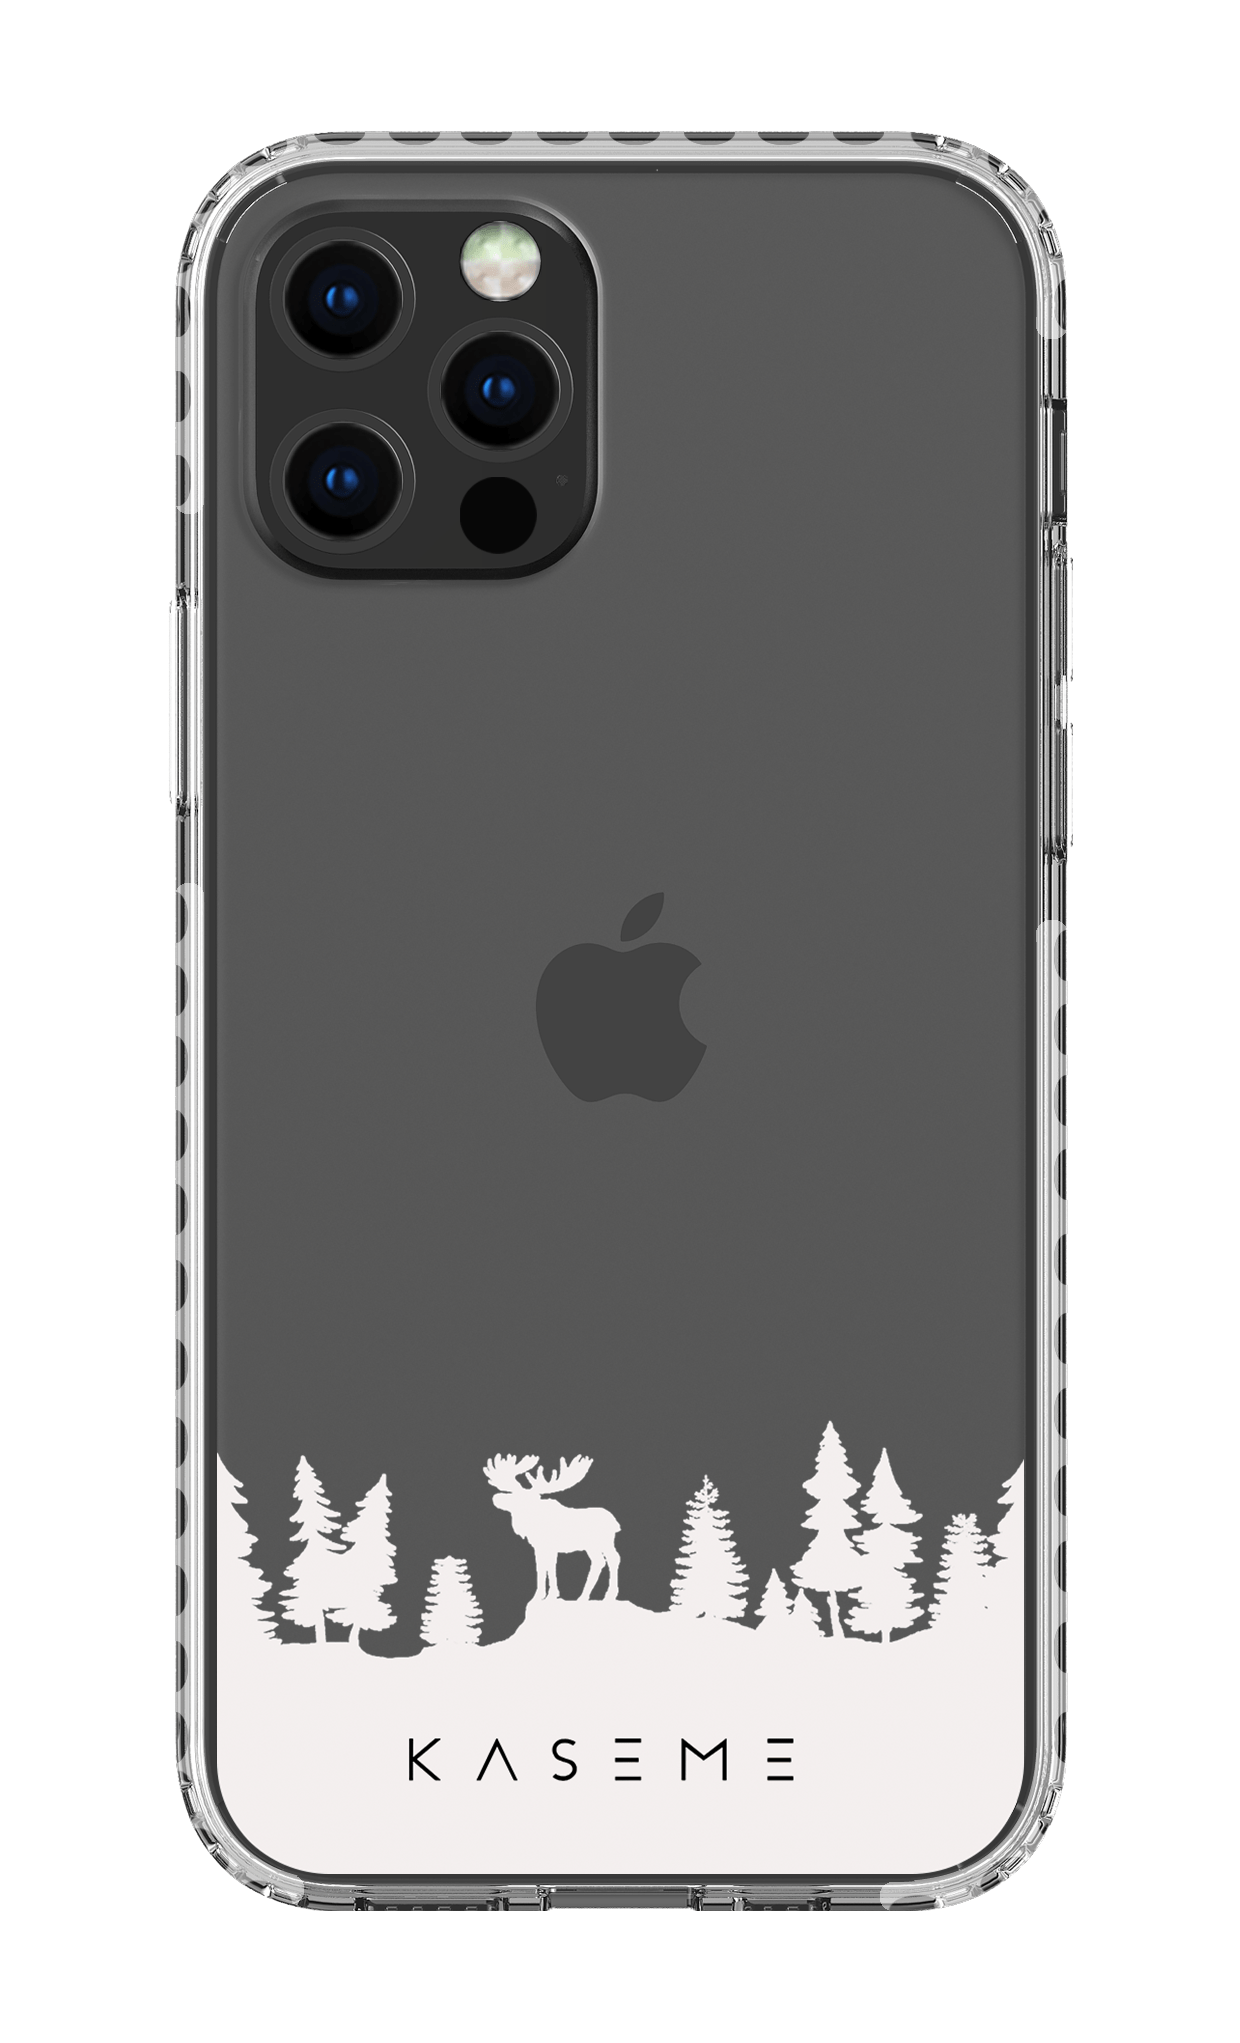 The Moose Clear Case